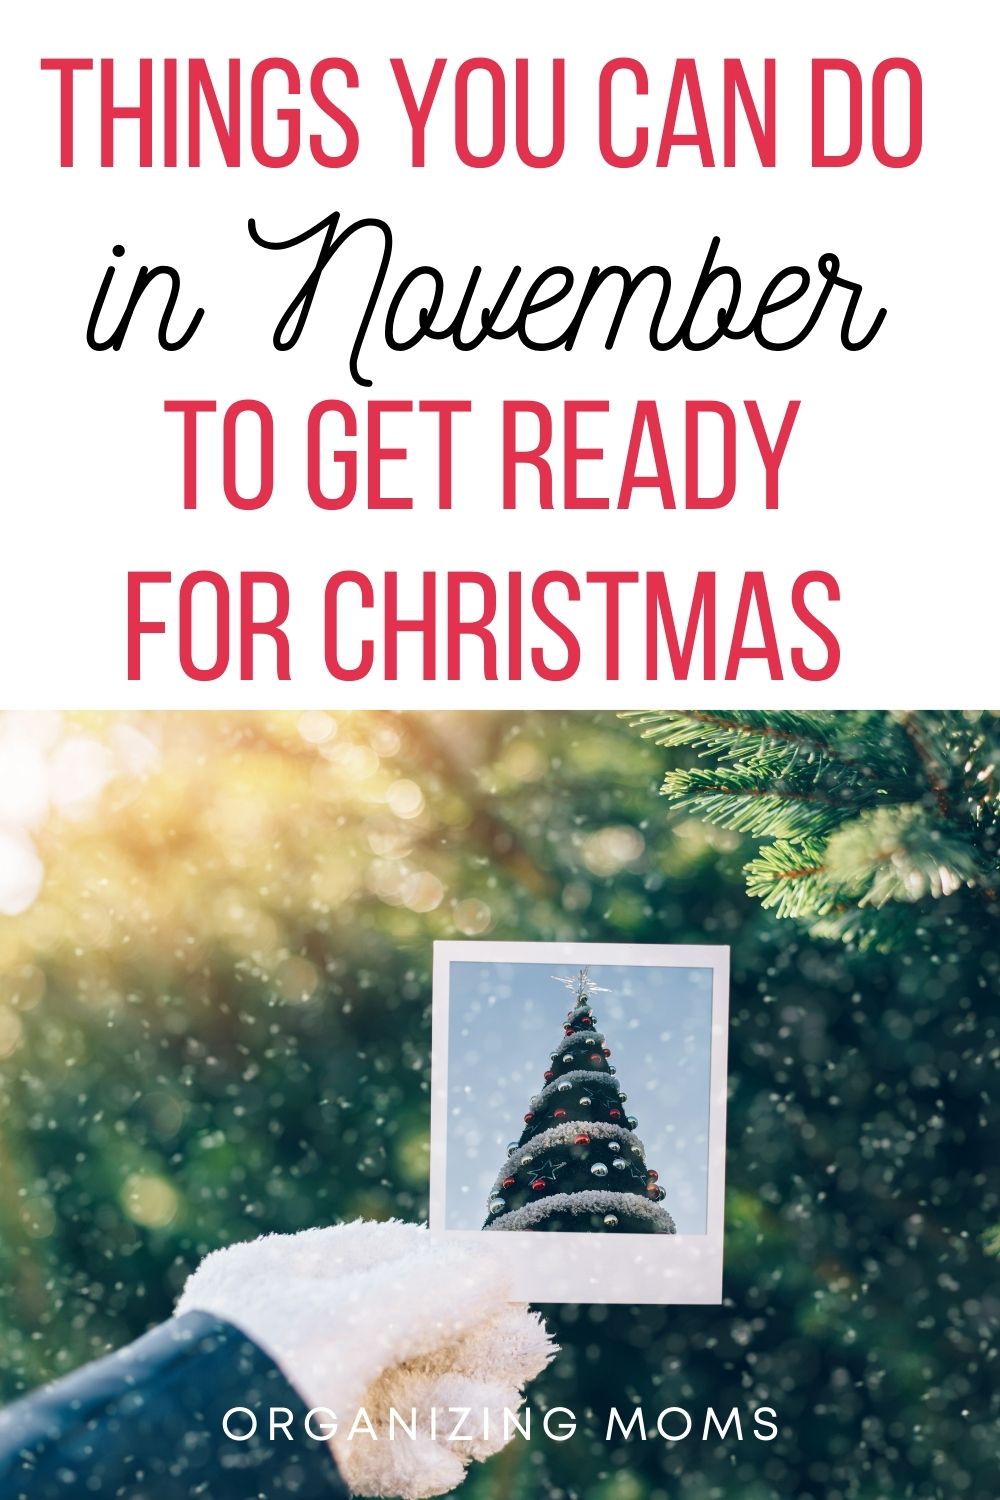 Image of person holding picture of Christmas tree up to an evergreen tree with the text Things You Can Do in November to Get Ready for Christmas